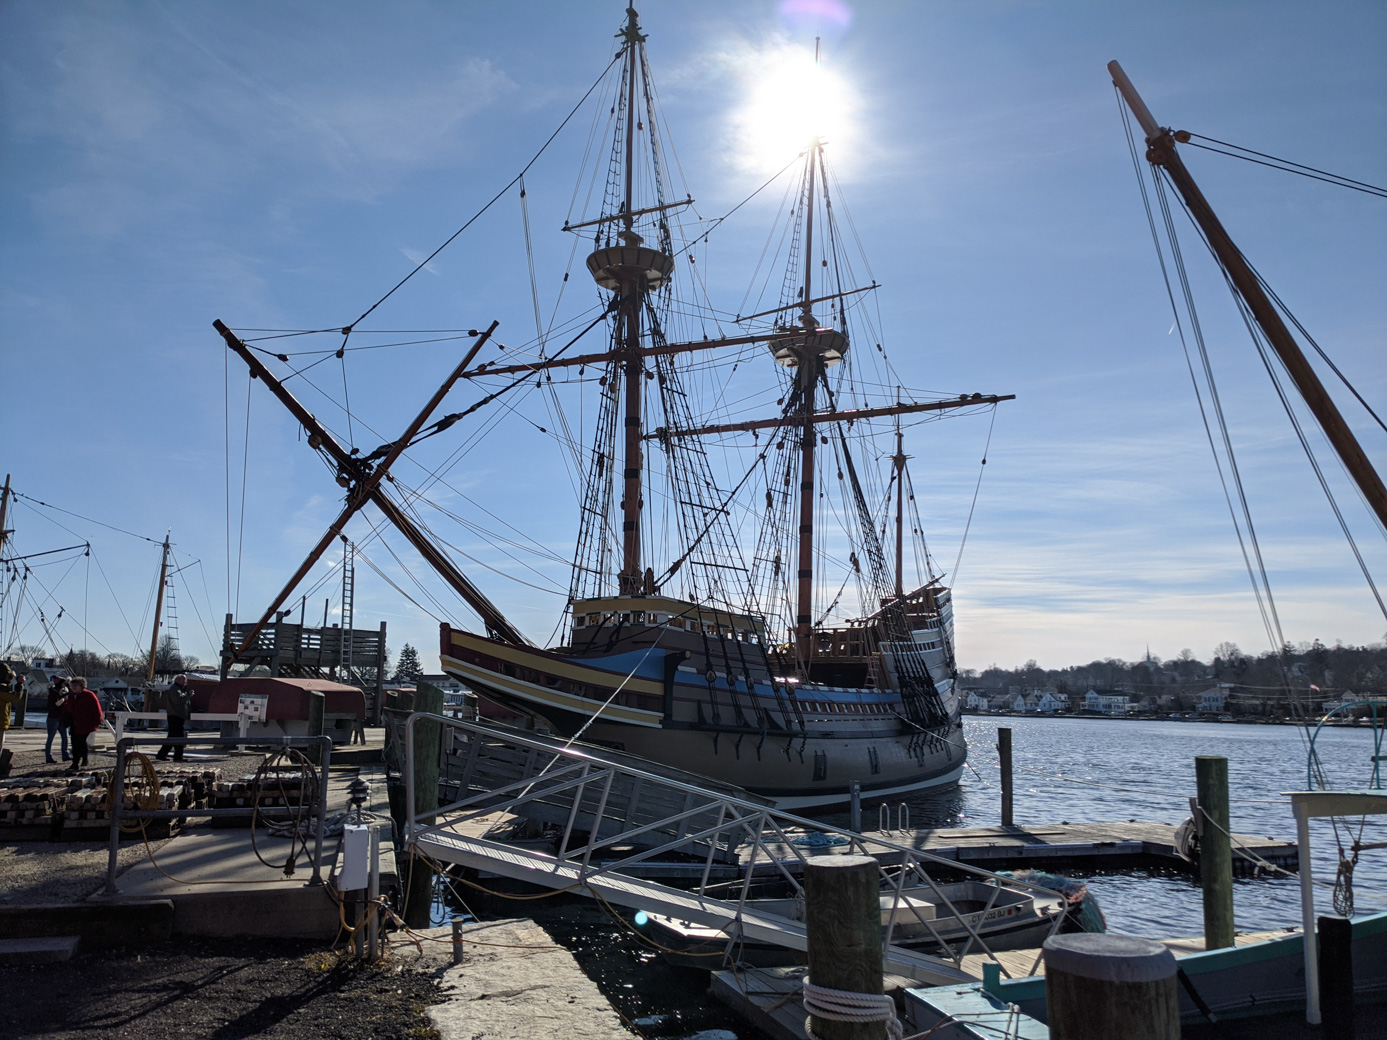 The Mayflower II in the water in Mystic CT